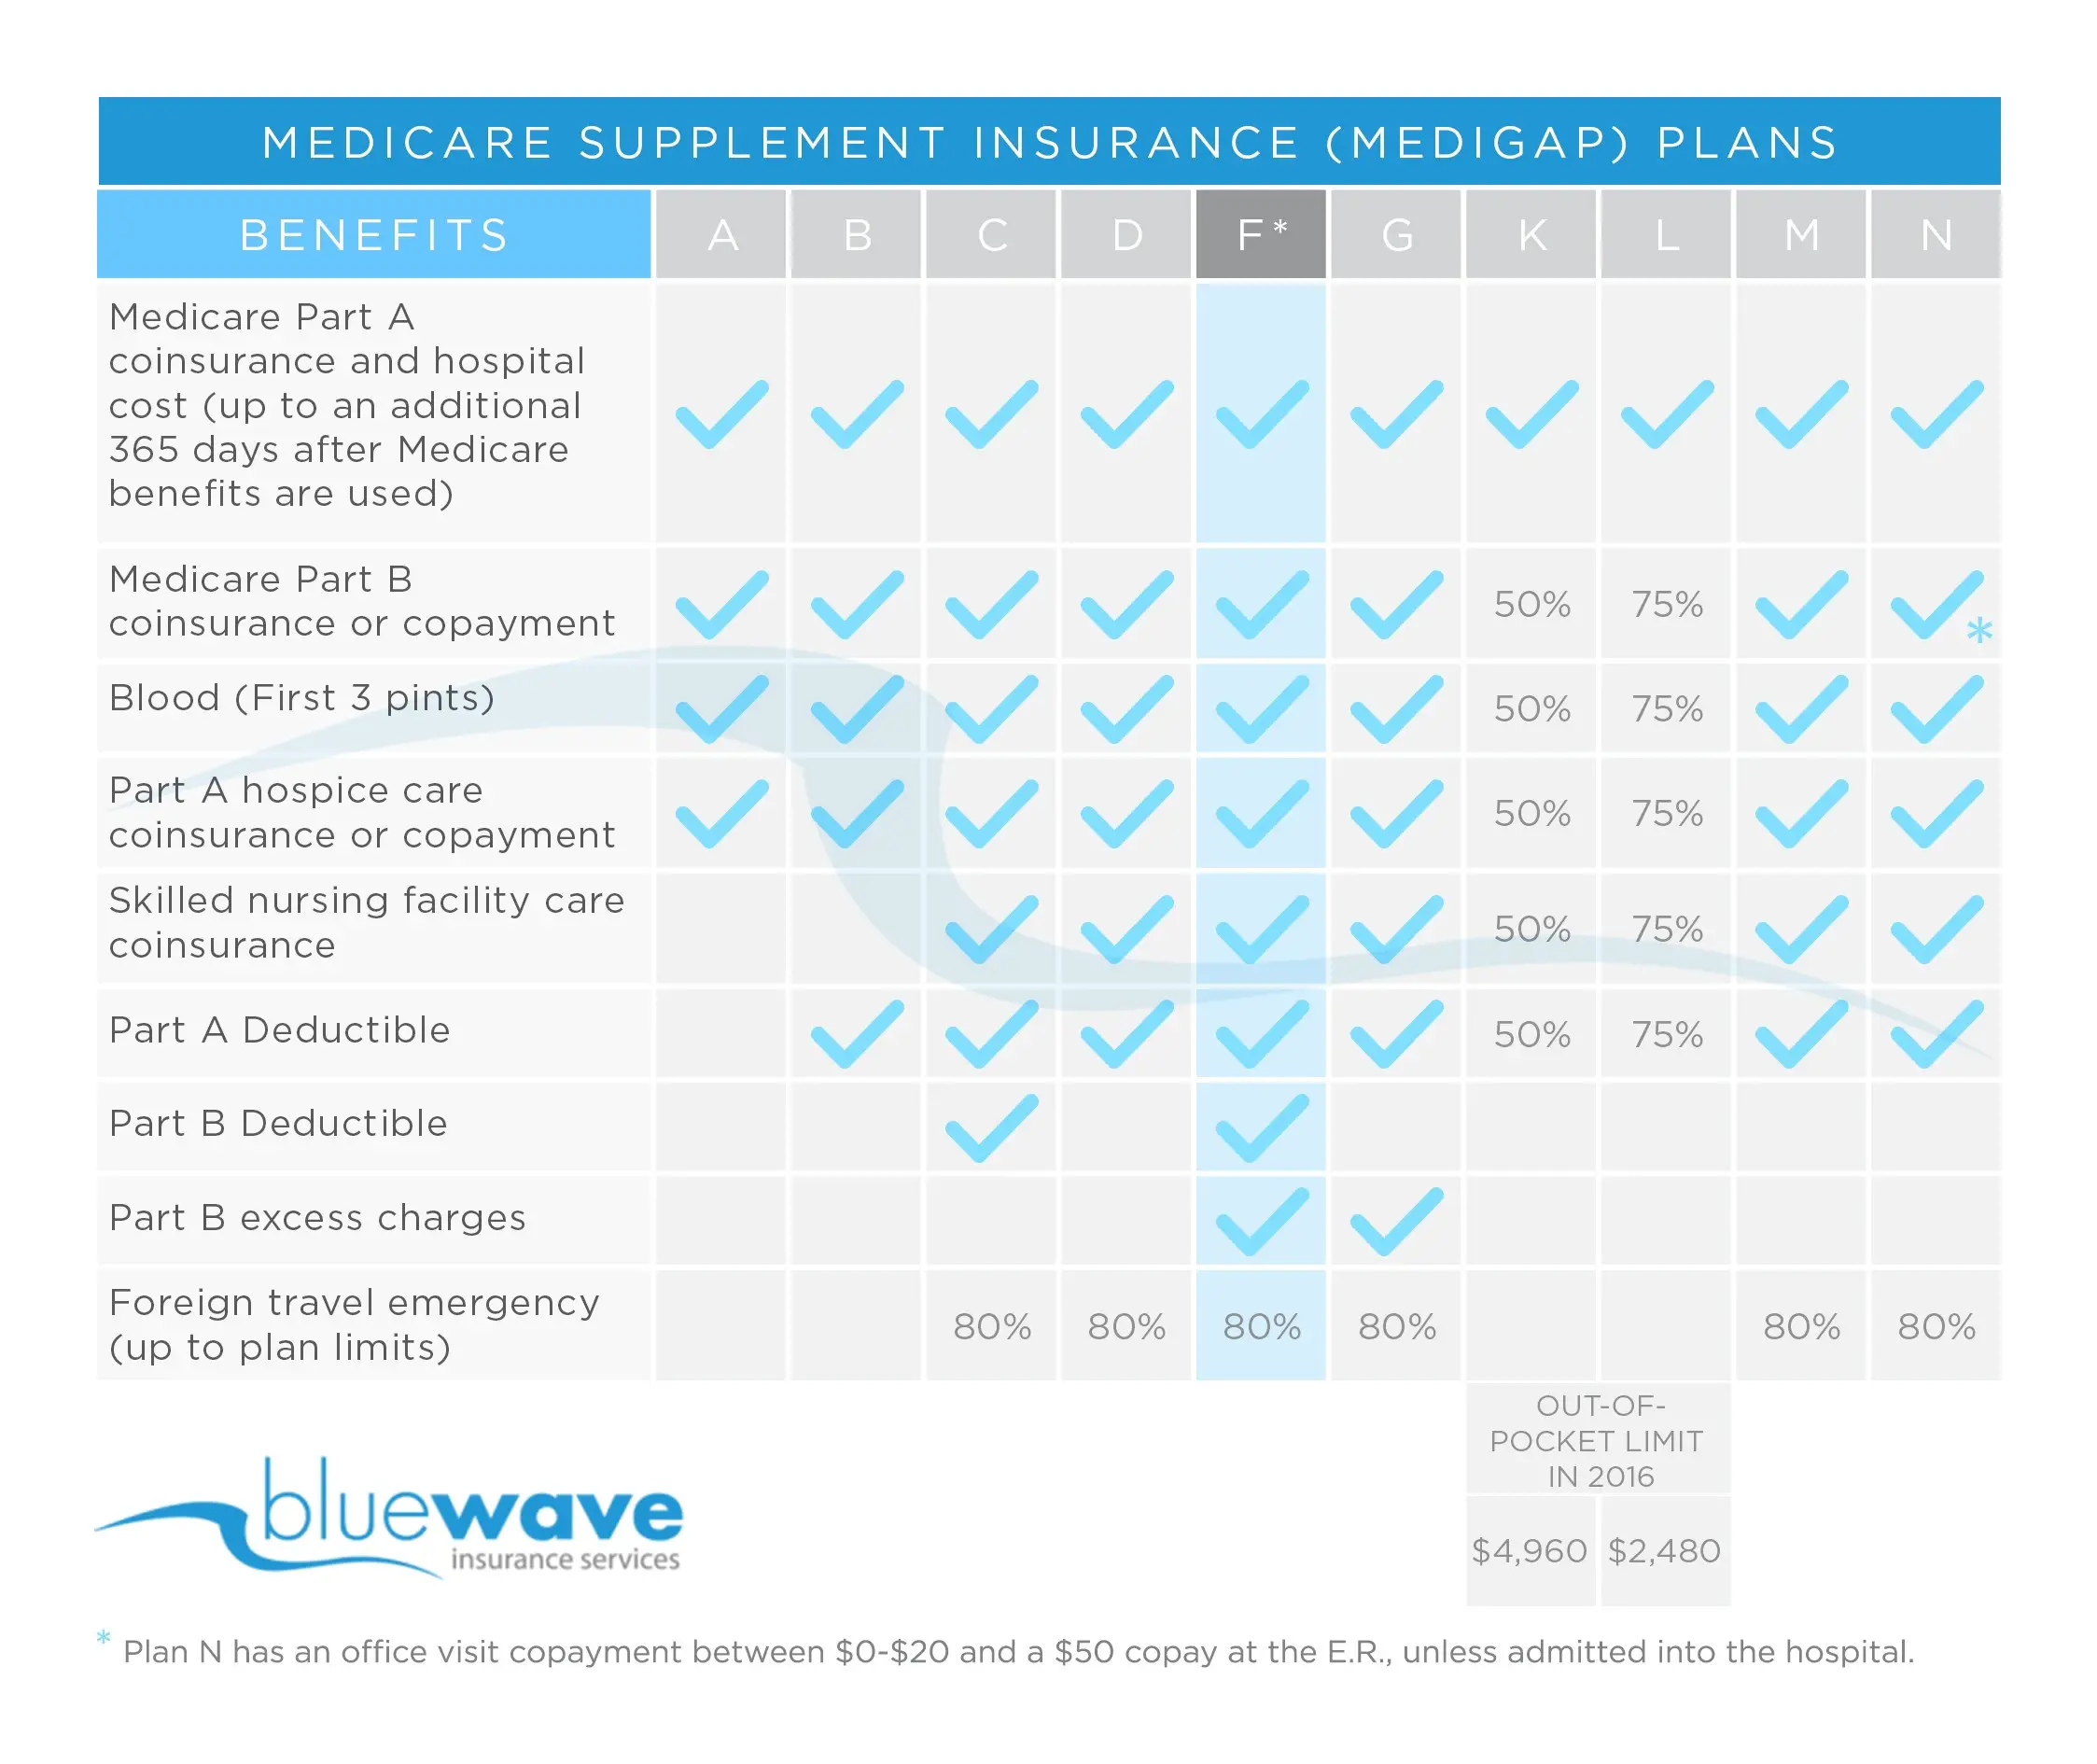 Mutual Of Omaha Medicare Supplement Review